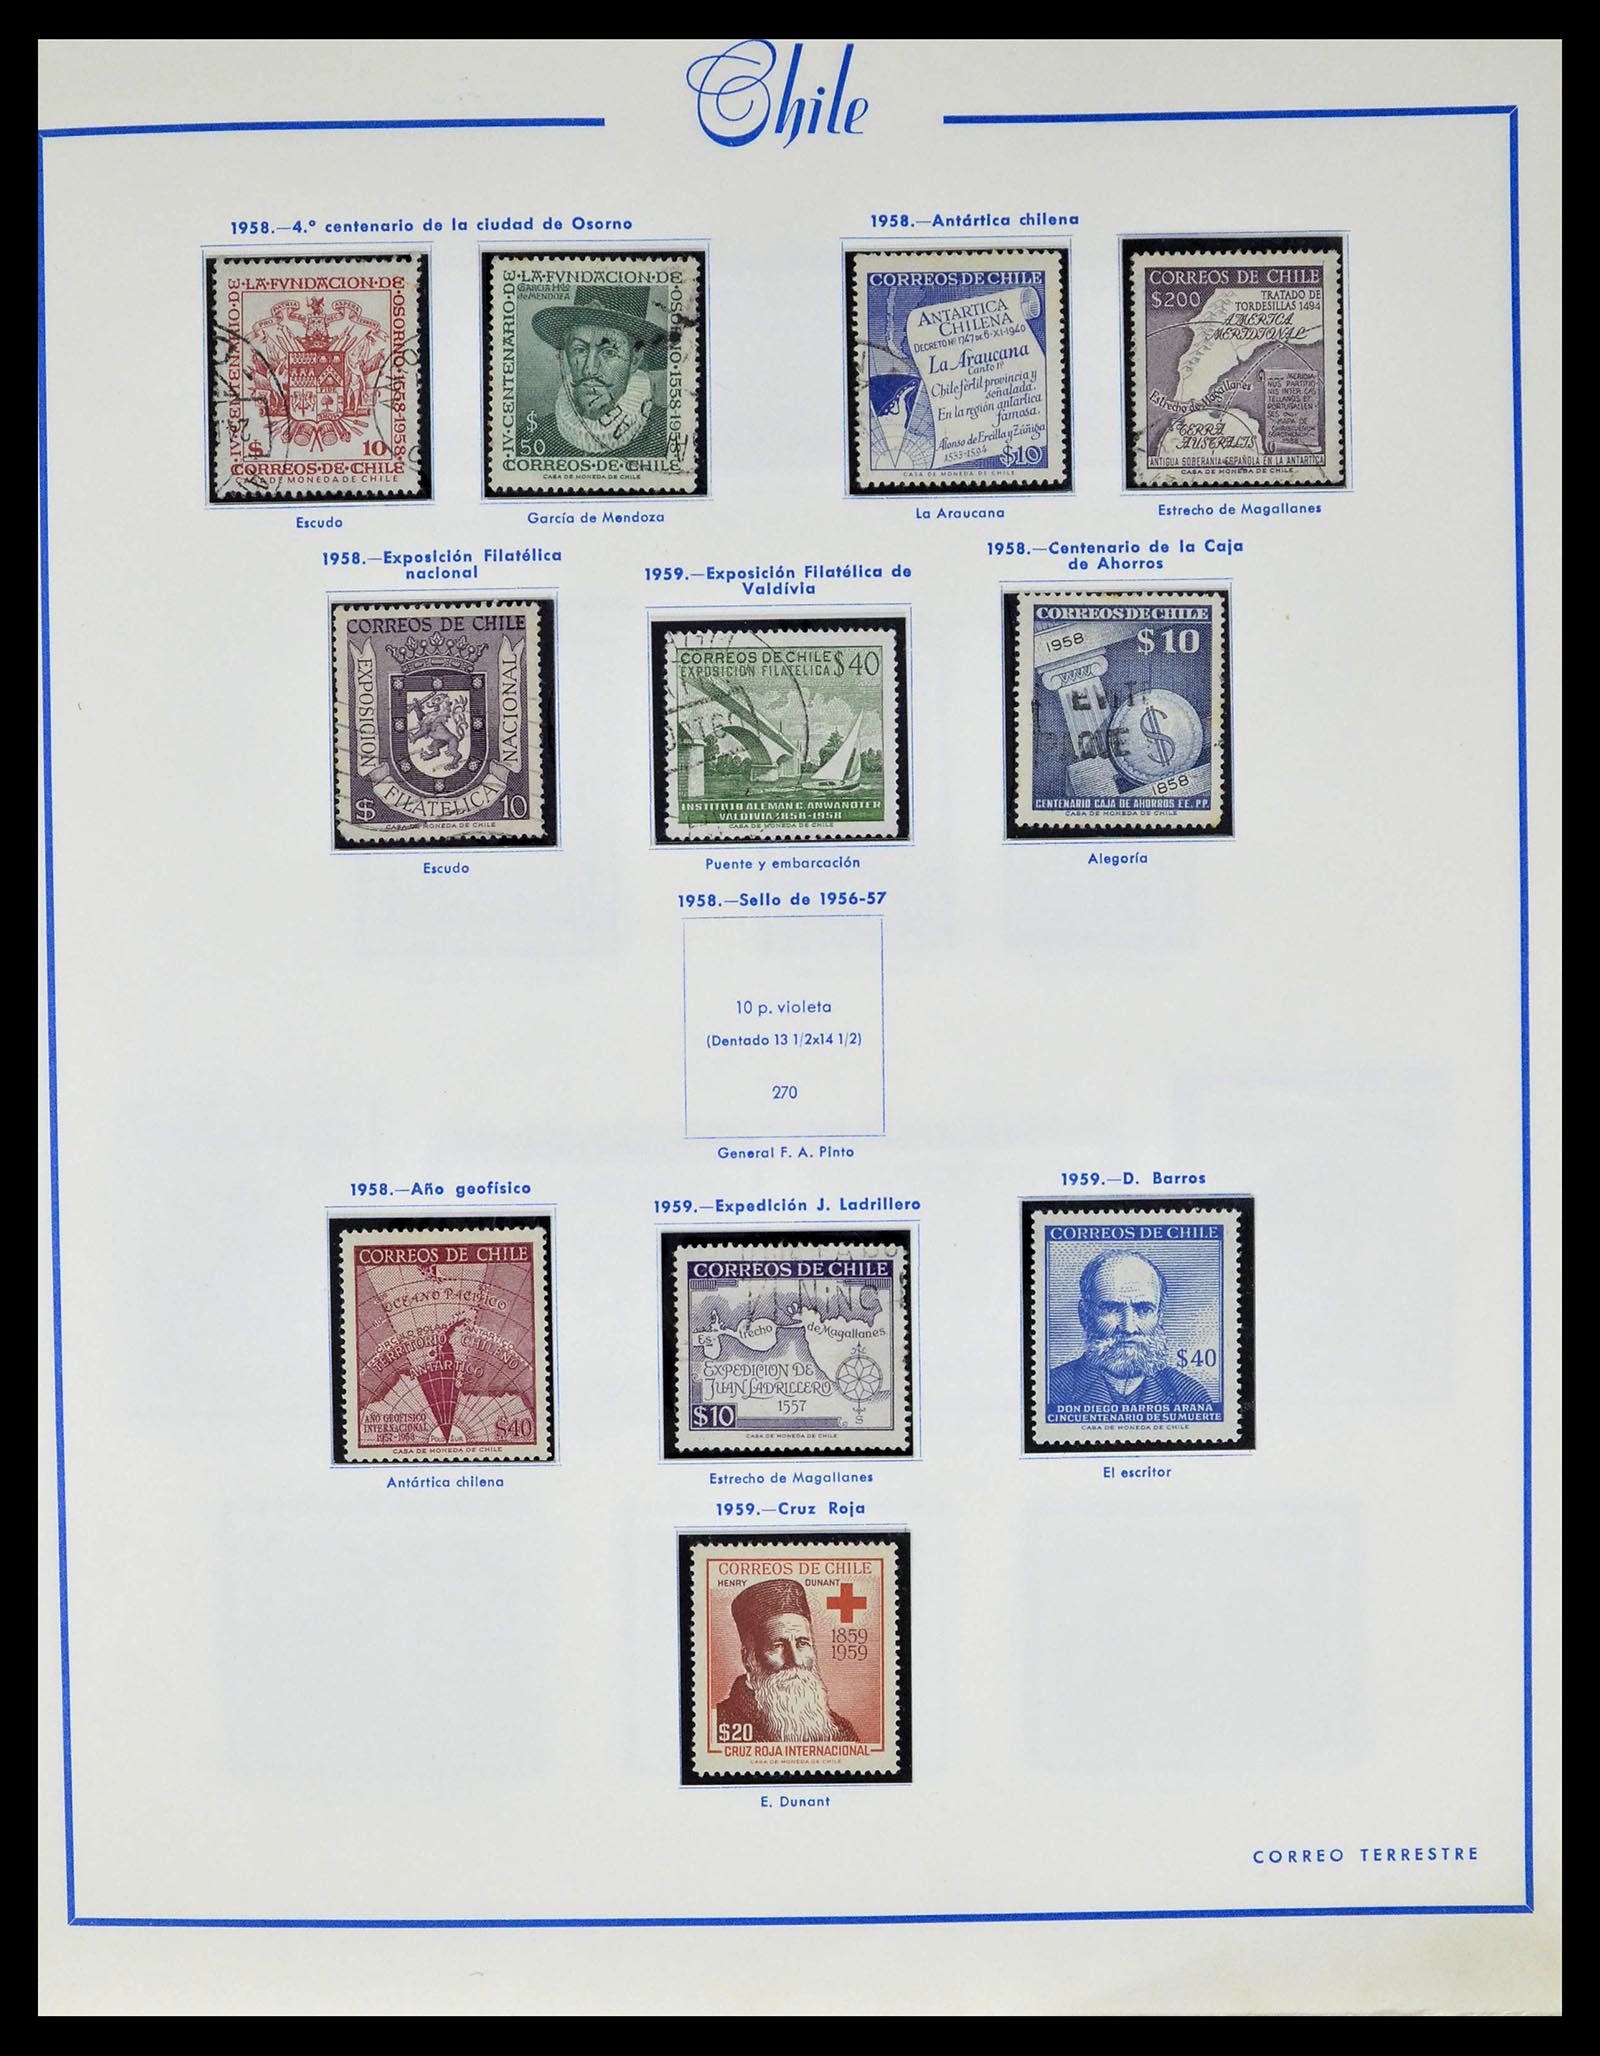 39213 0018 - Stamp collection 39213 Chile 1853-1970.